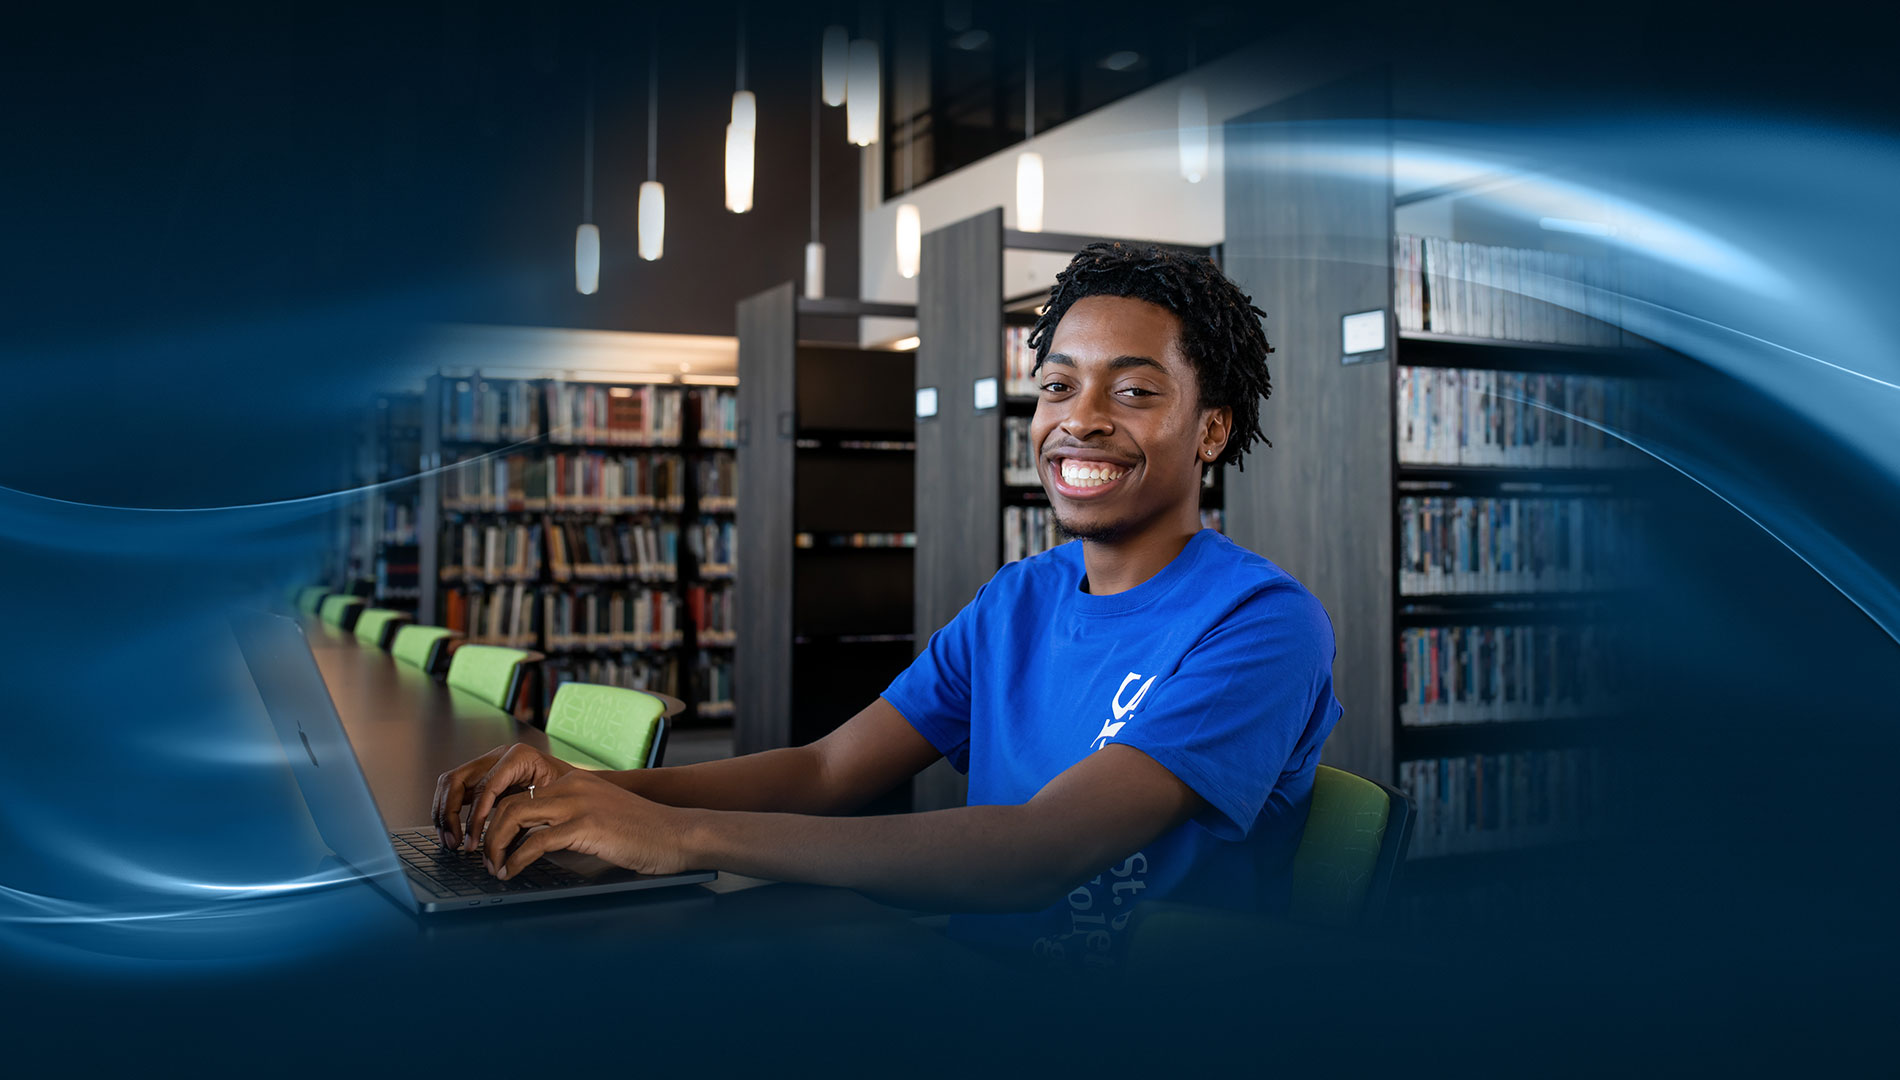 male SPC student in a blue SPC t-shirt sitting at a laptop smiling broadly